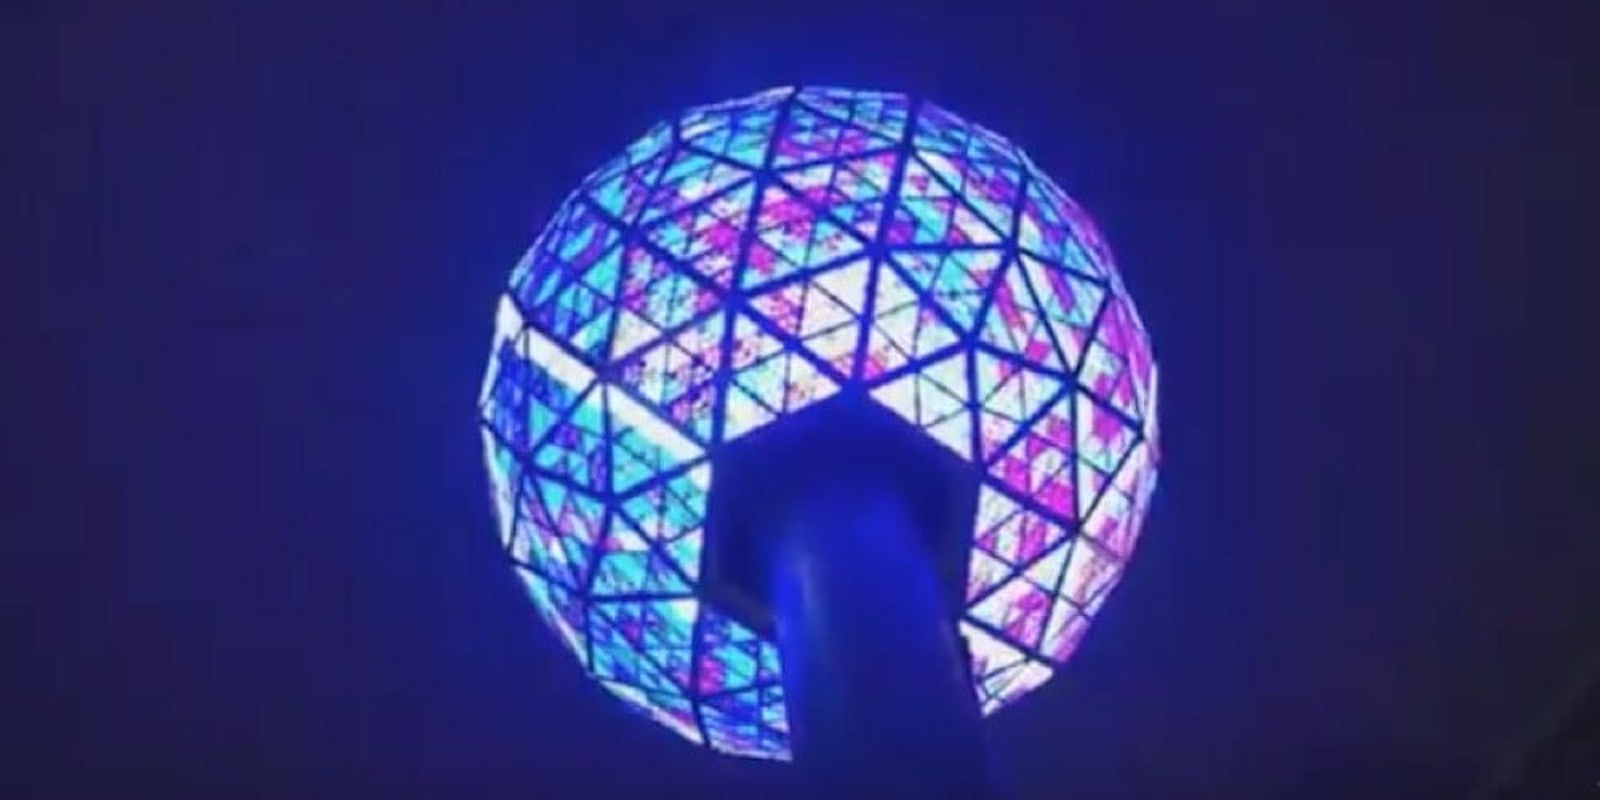 2016 times square ball drop new year's eve